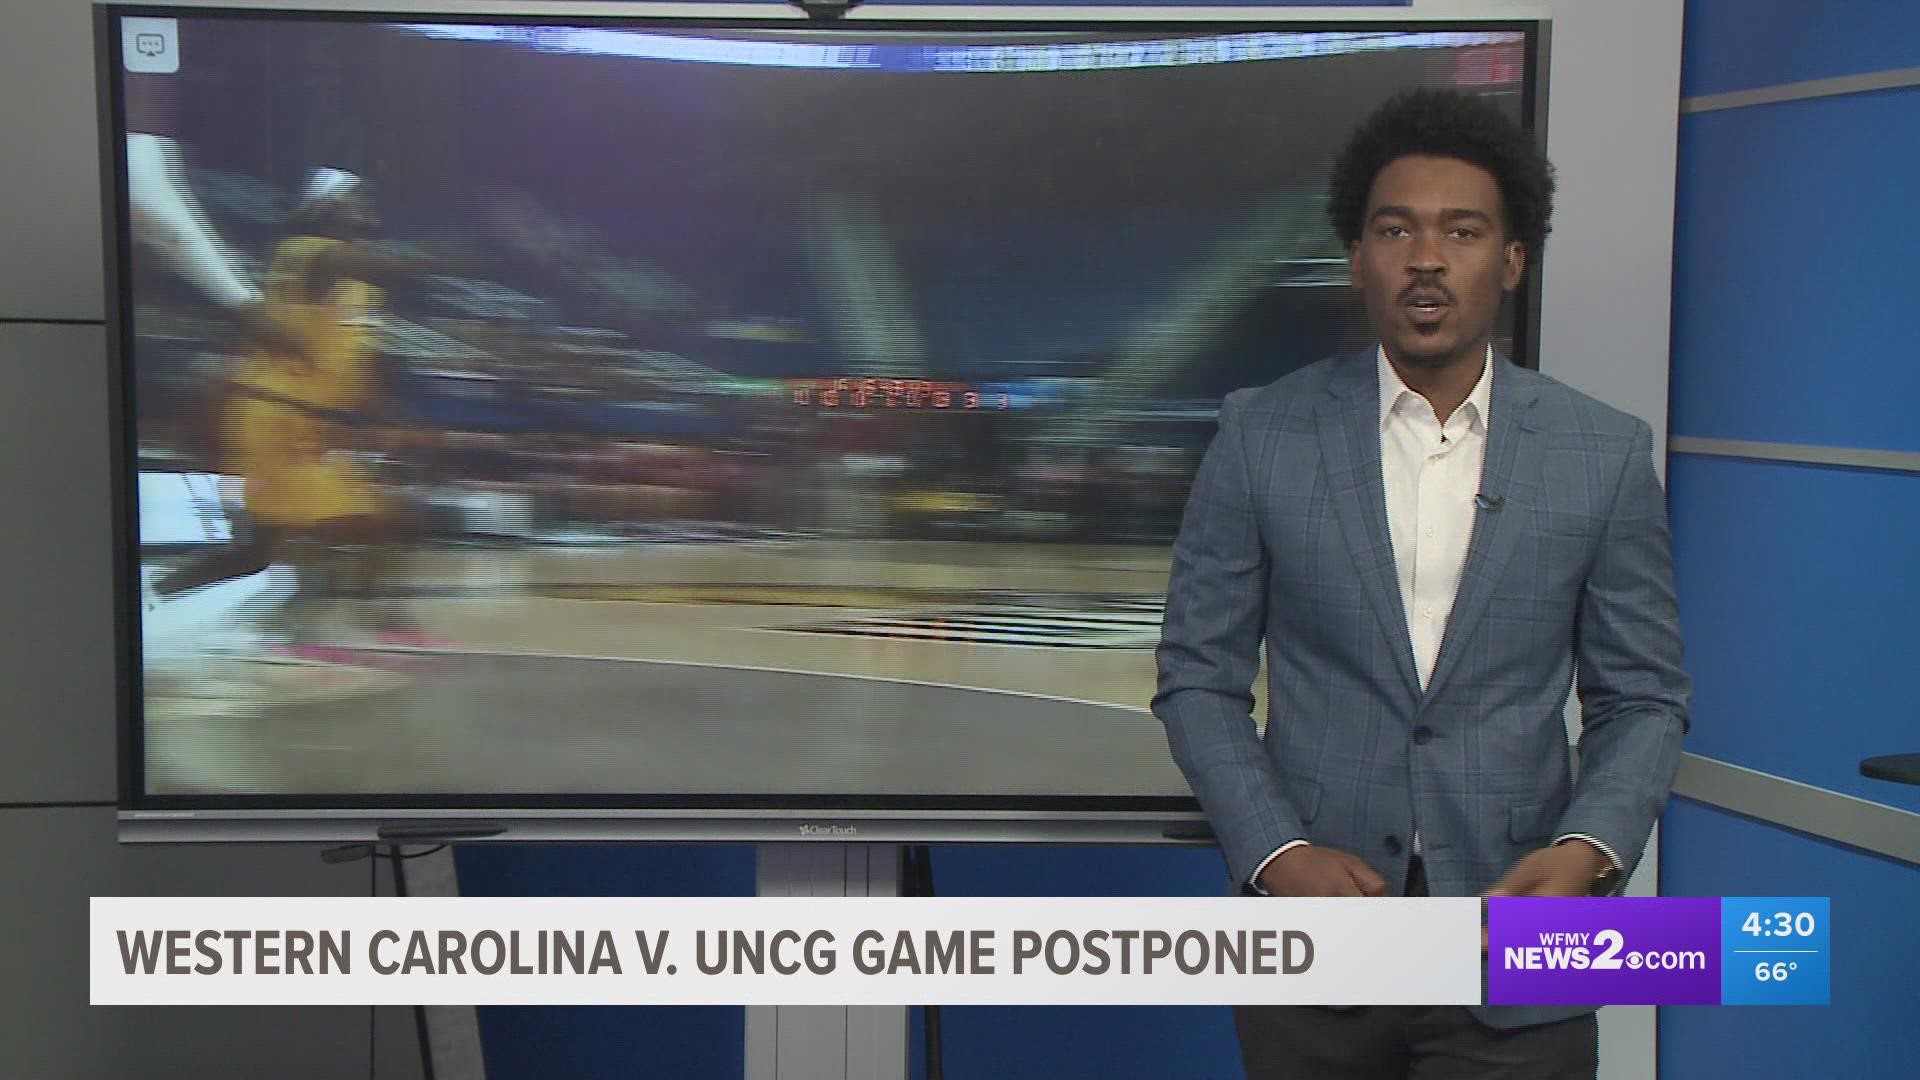 More North Carolina basketball teams are postponing games due to COVID-19, but conferences are working to reschedule those games.